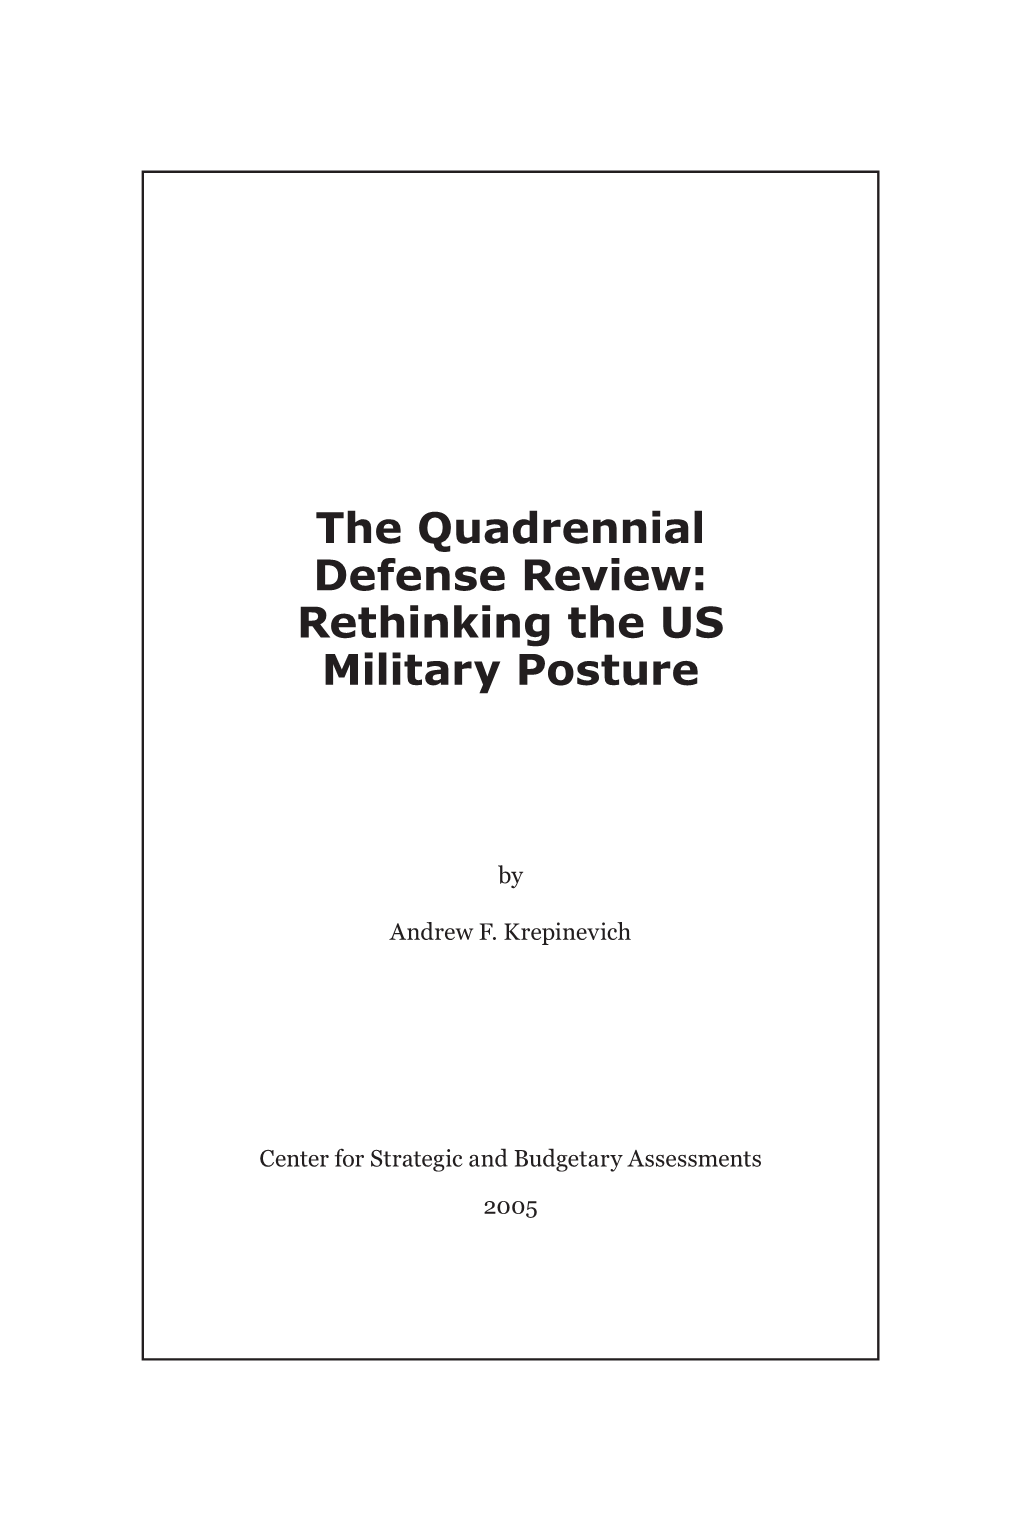 The Quadrennial Defense Review: Rethinking the US Military Posture